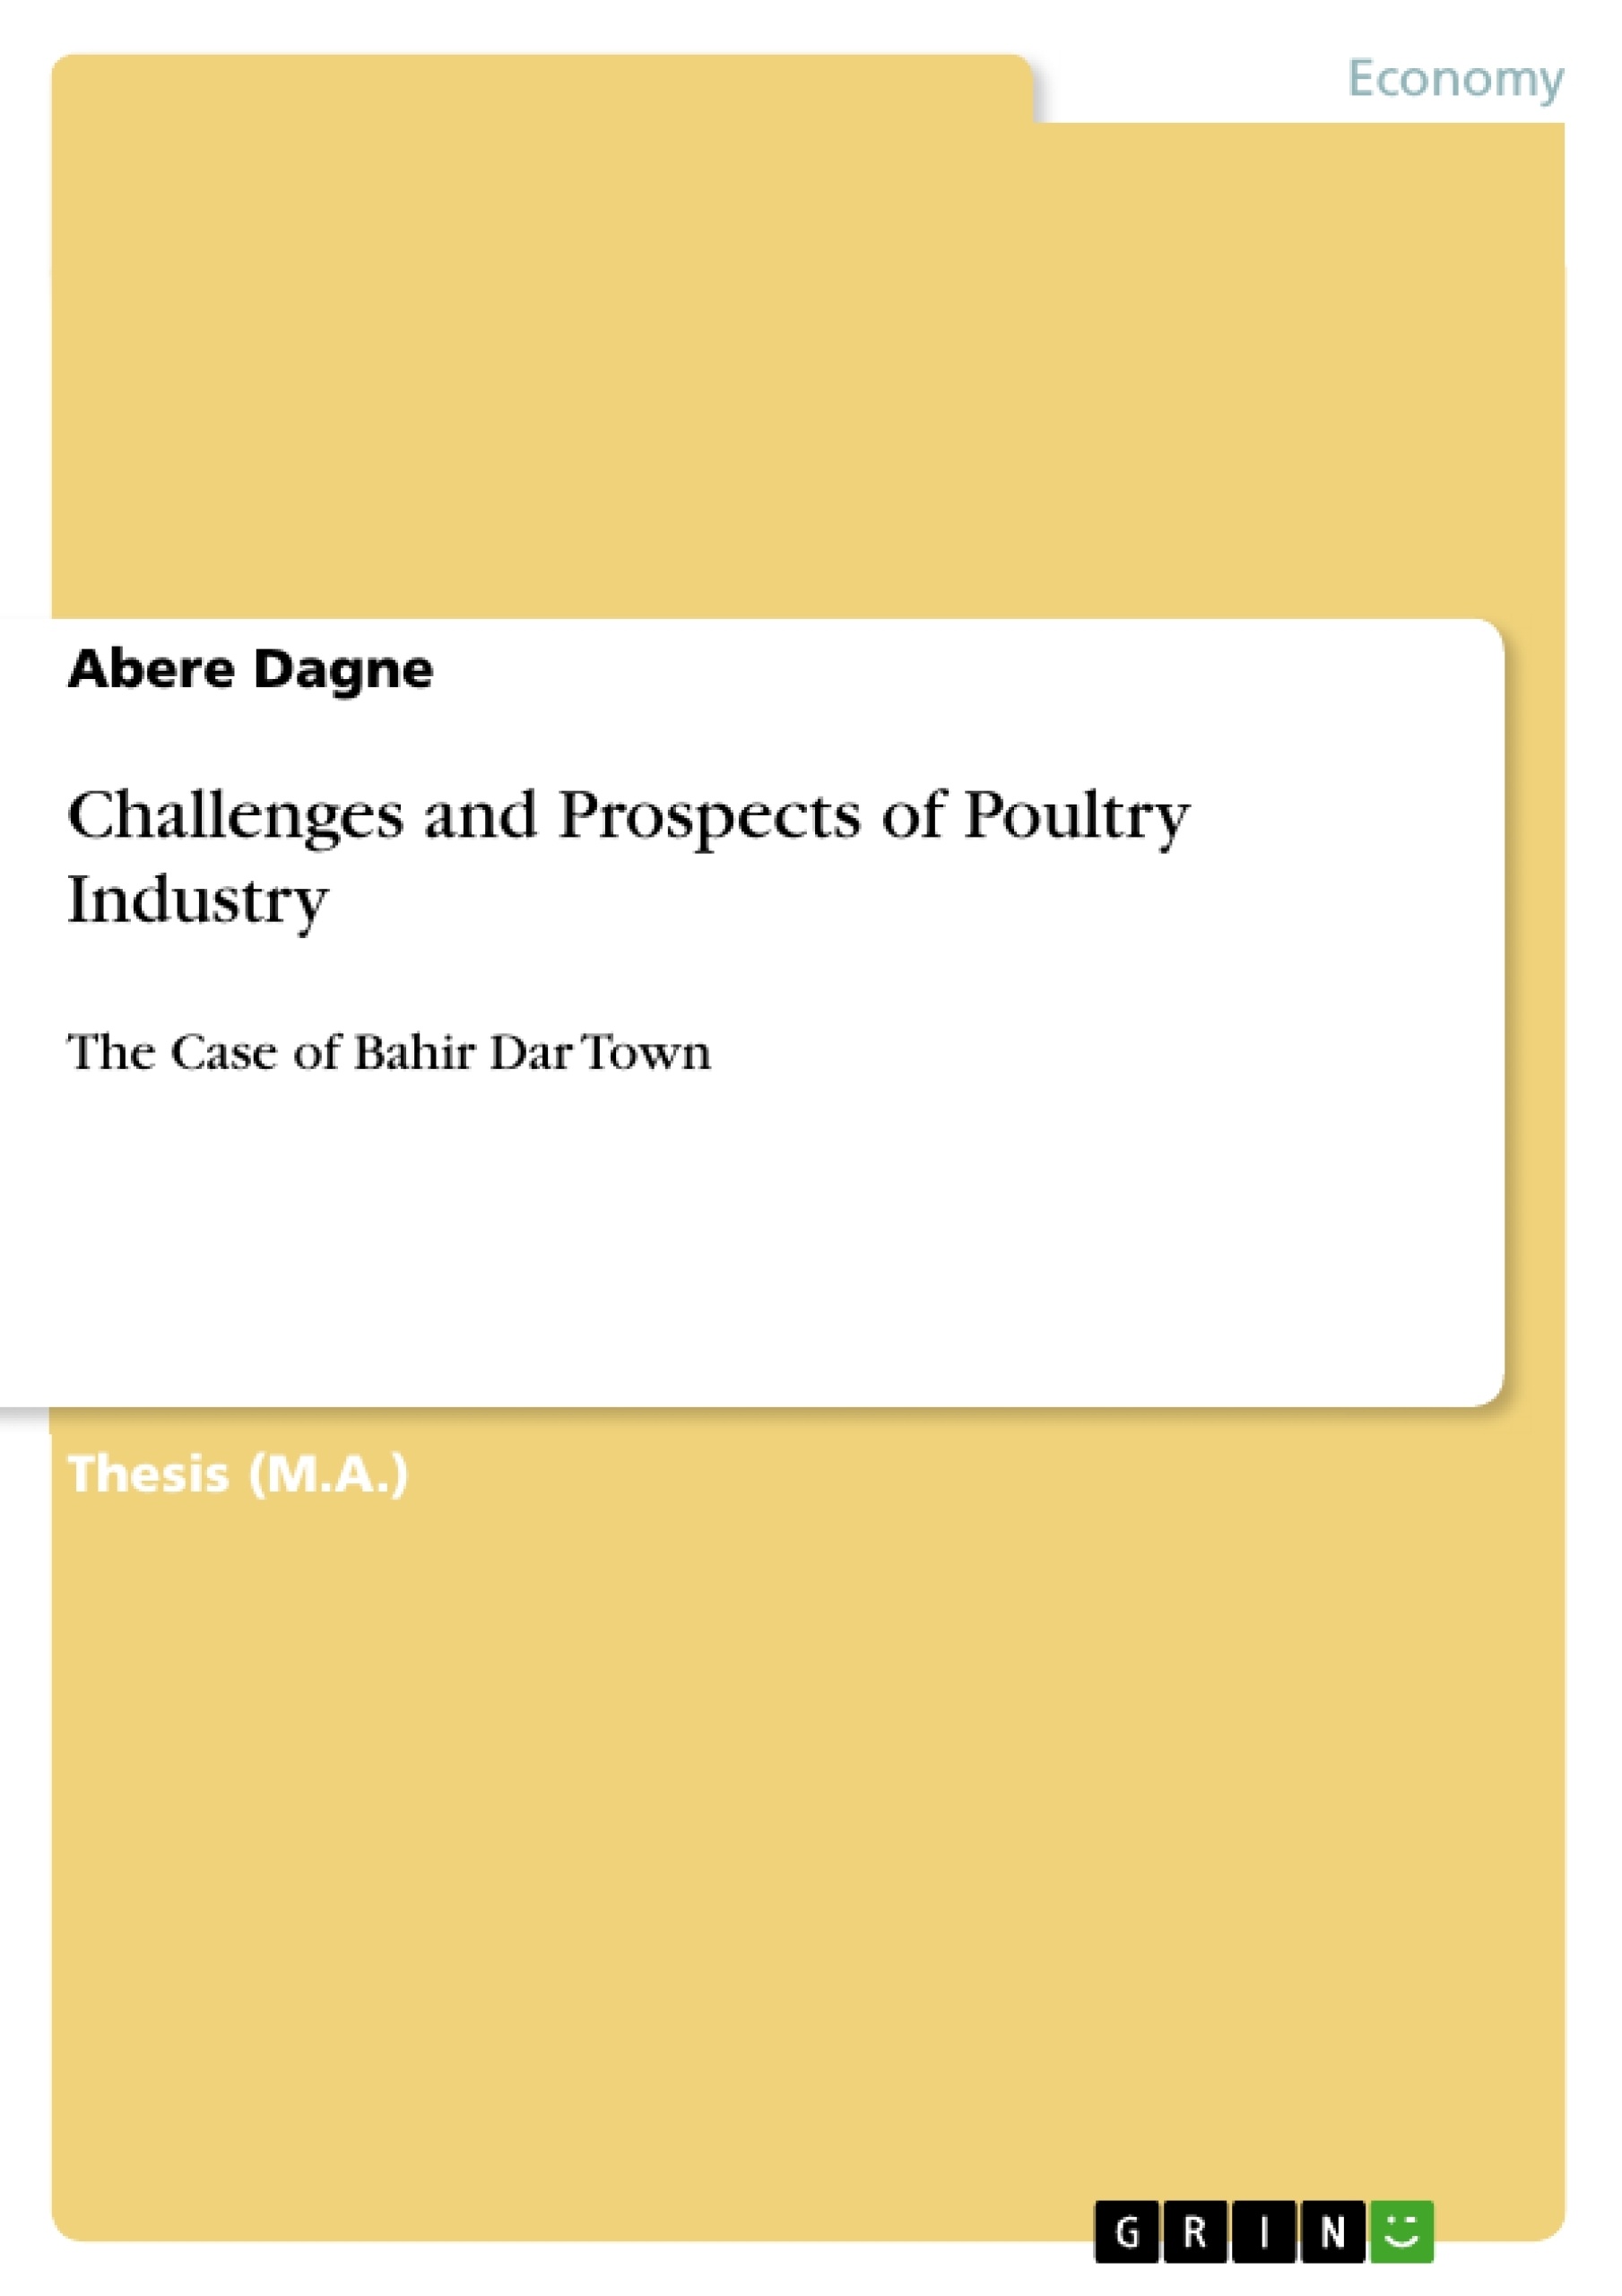 Title: Challenges and Prospects of Poultry Industry